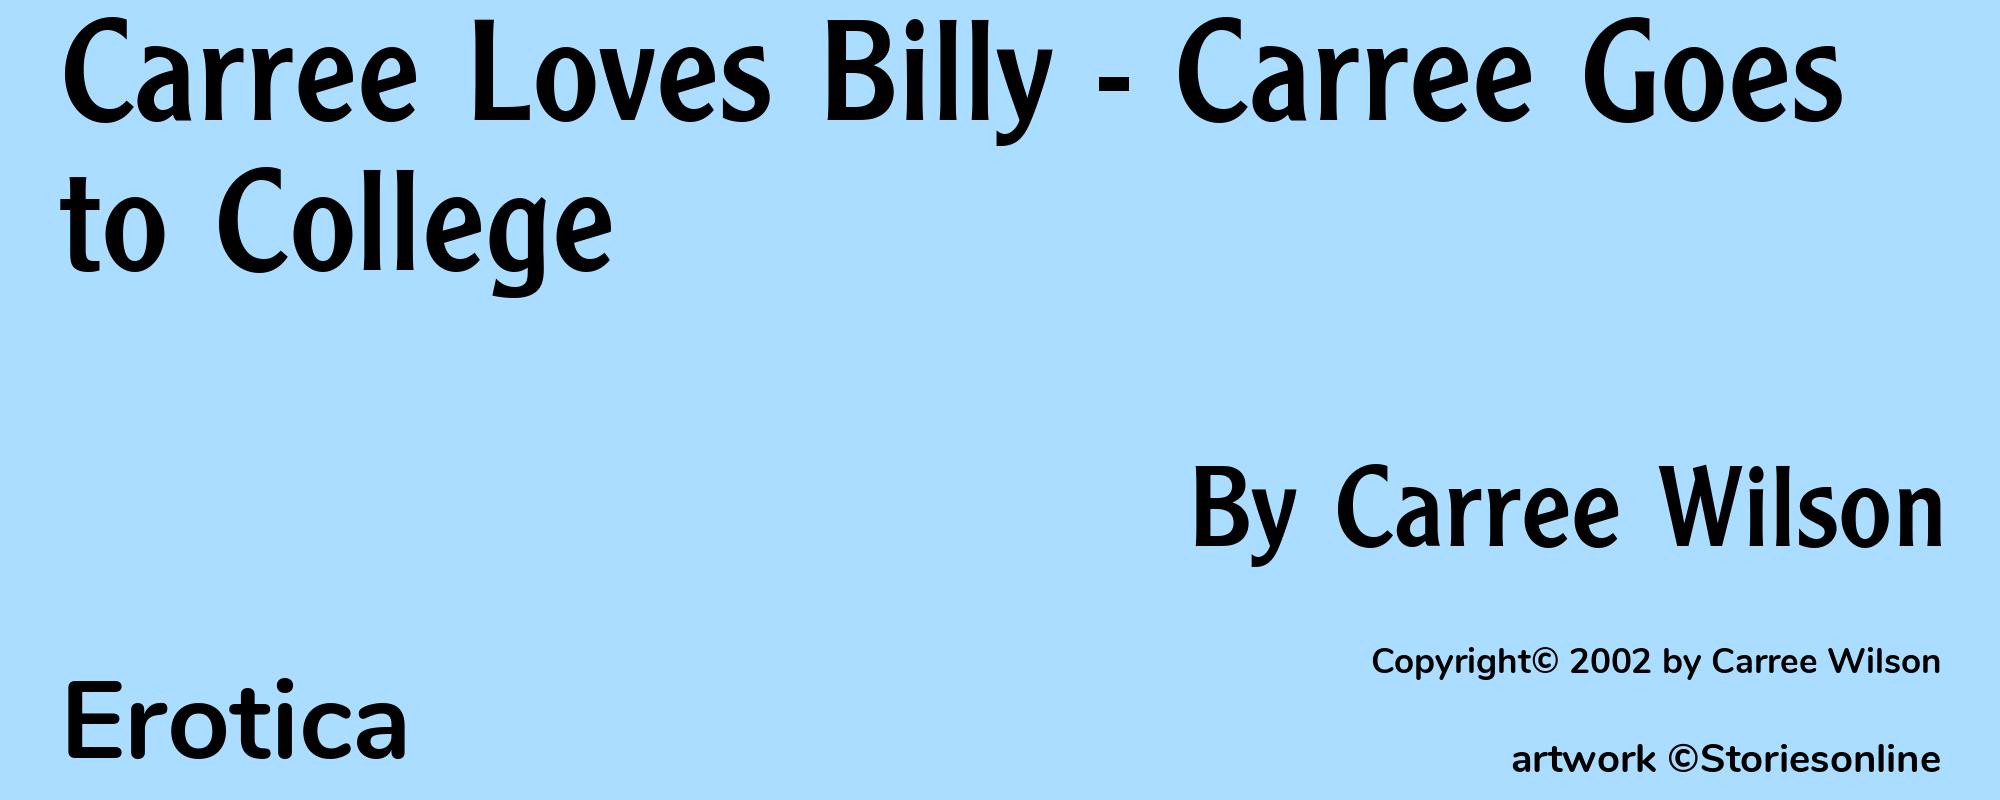 Carree Loves Billy - Carree Goes to College - Cover